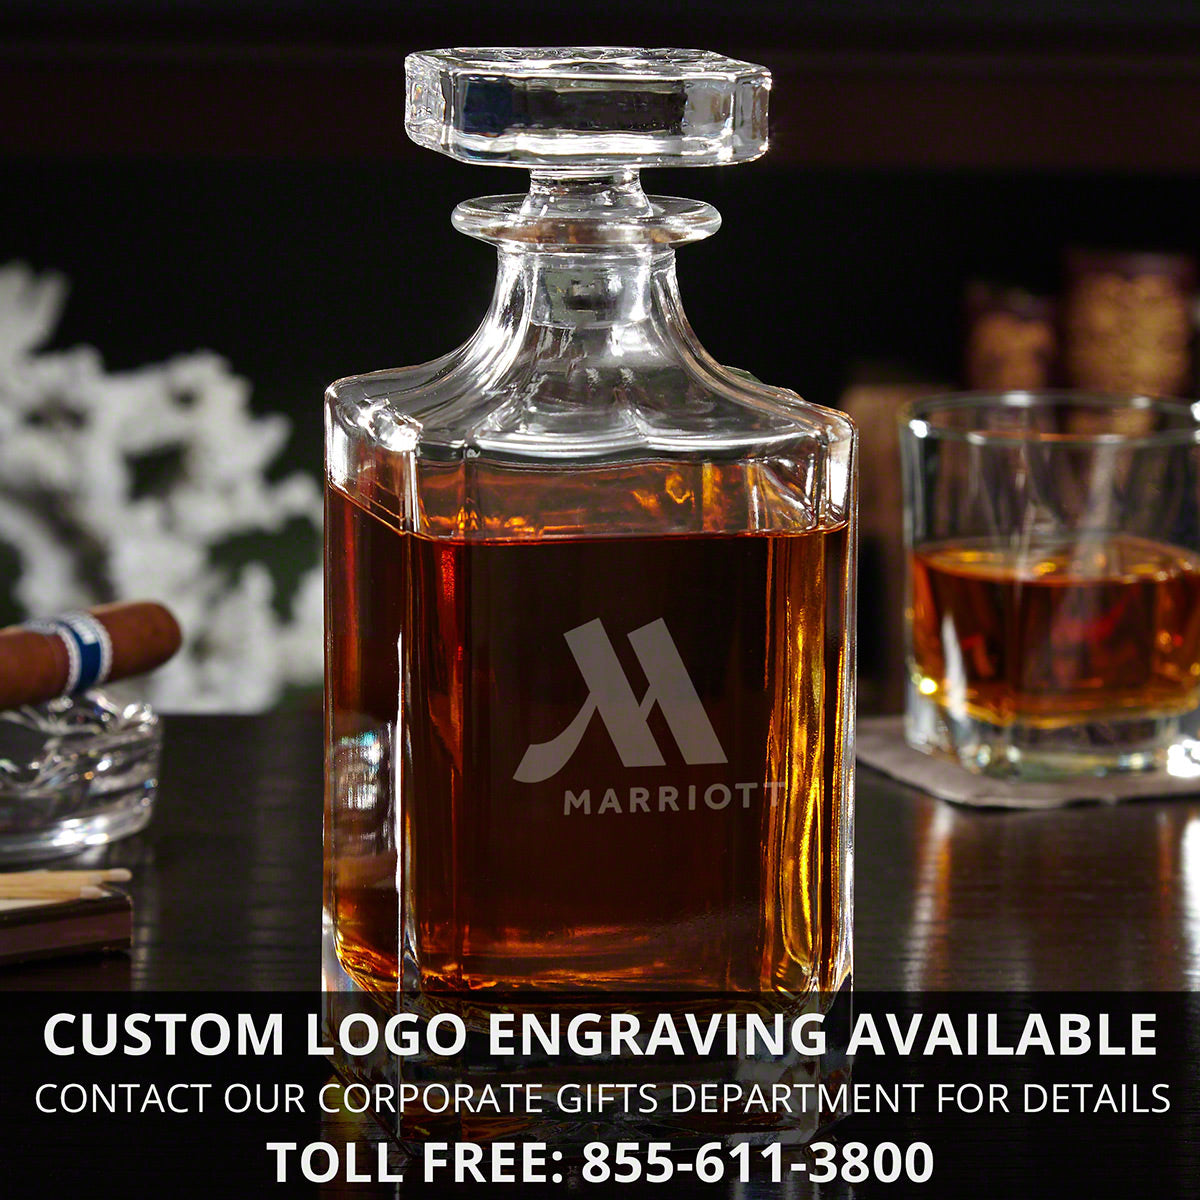 Engraved Scotch Decanter - Set of 5 Groomsmen Decanter Gifts